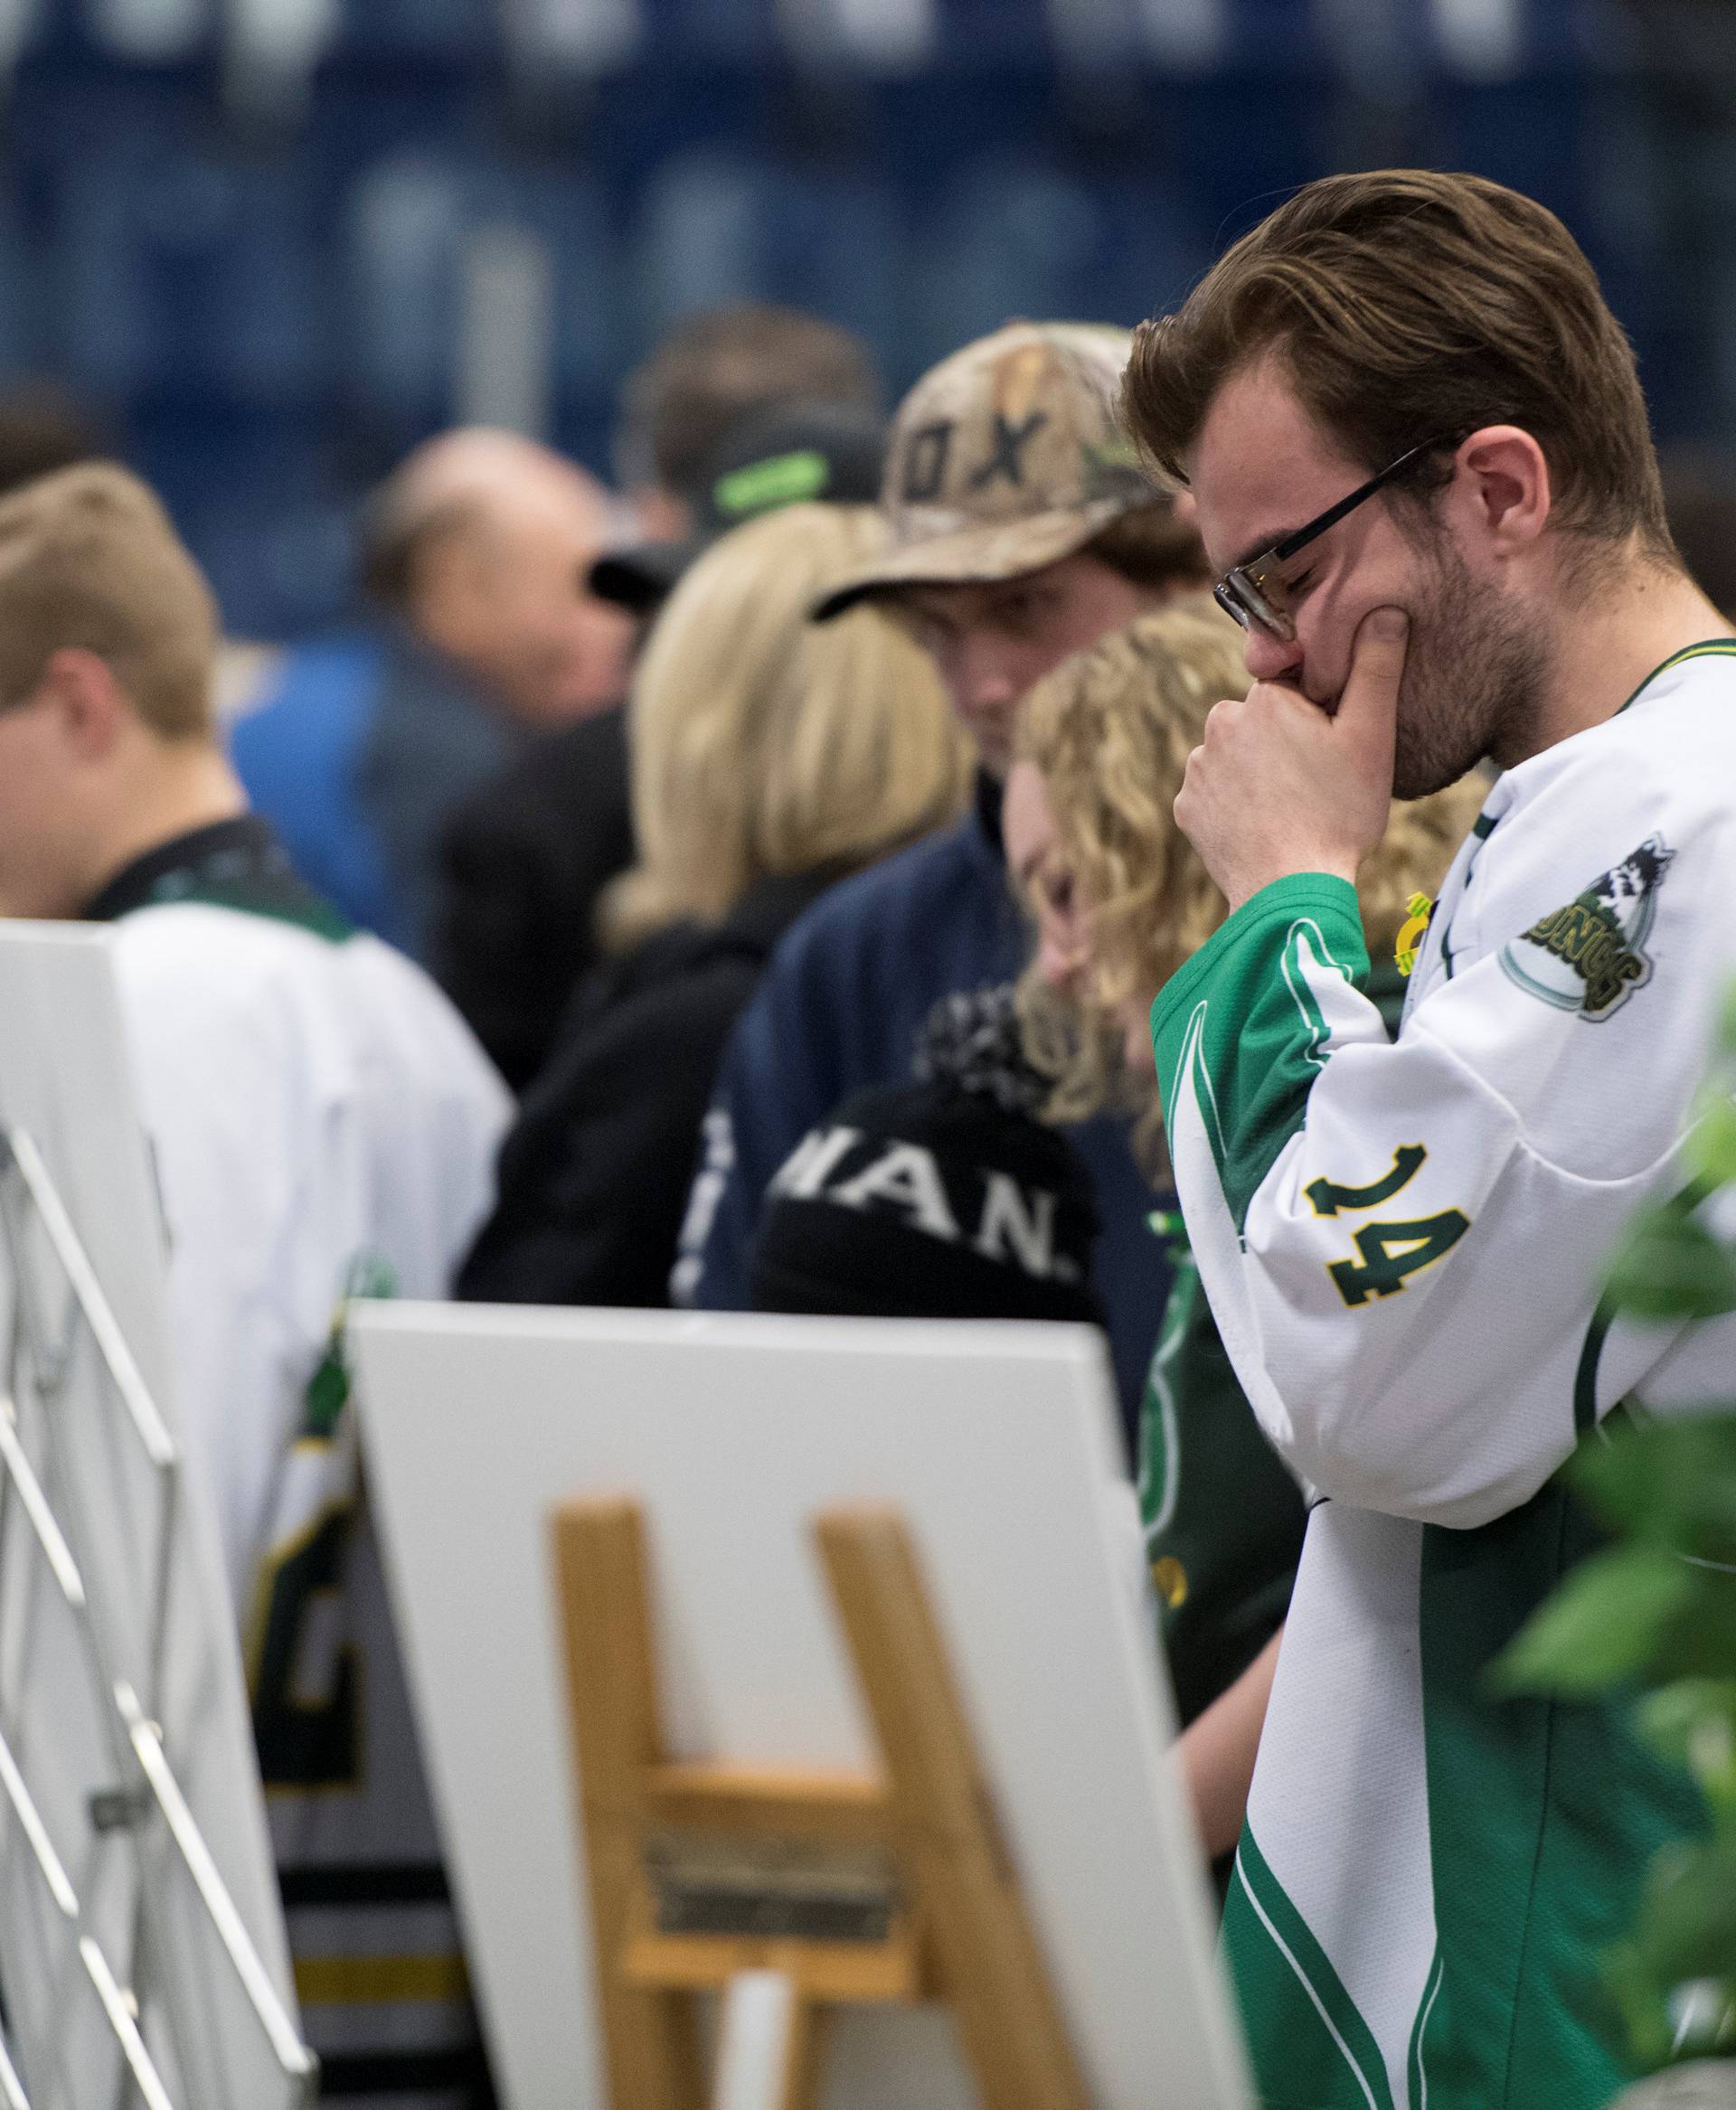 Mourners attend a vigil at the Elgar Petersen Arena, home of the Humboldt Broncos, to honour the victims of a fatal bus accident in Humboldt